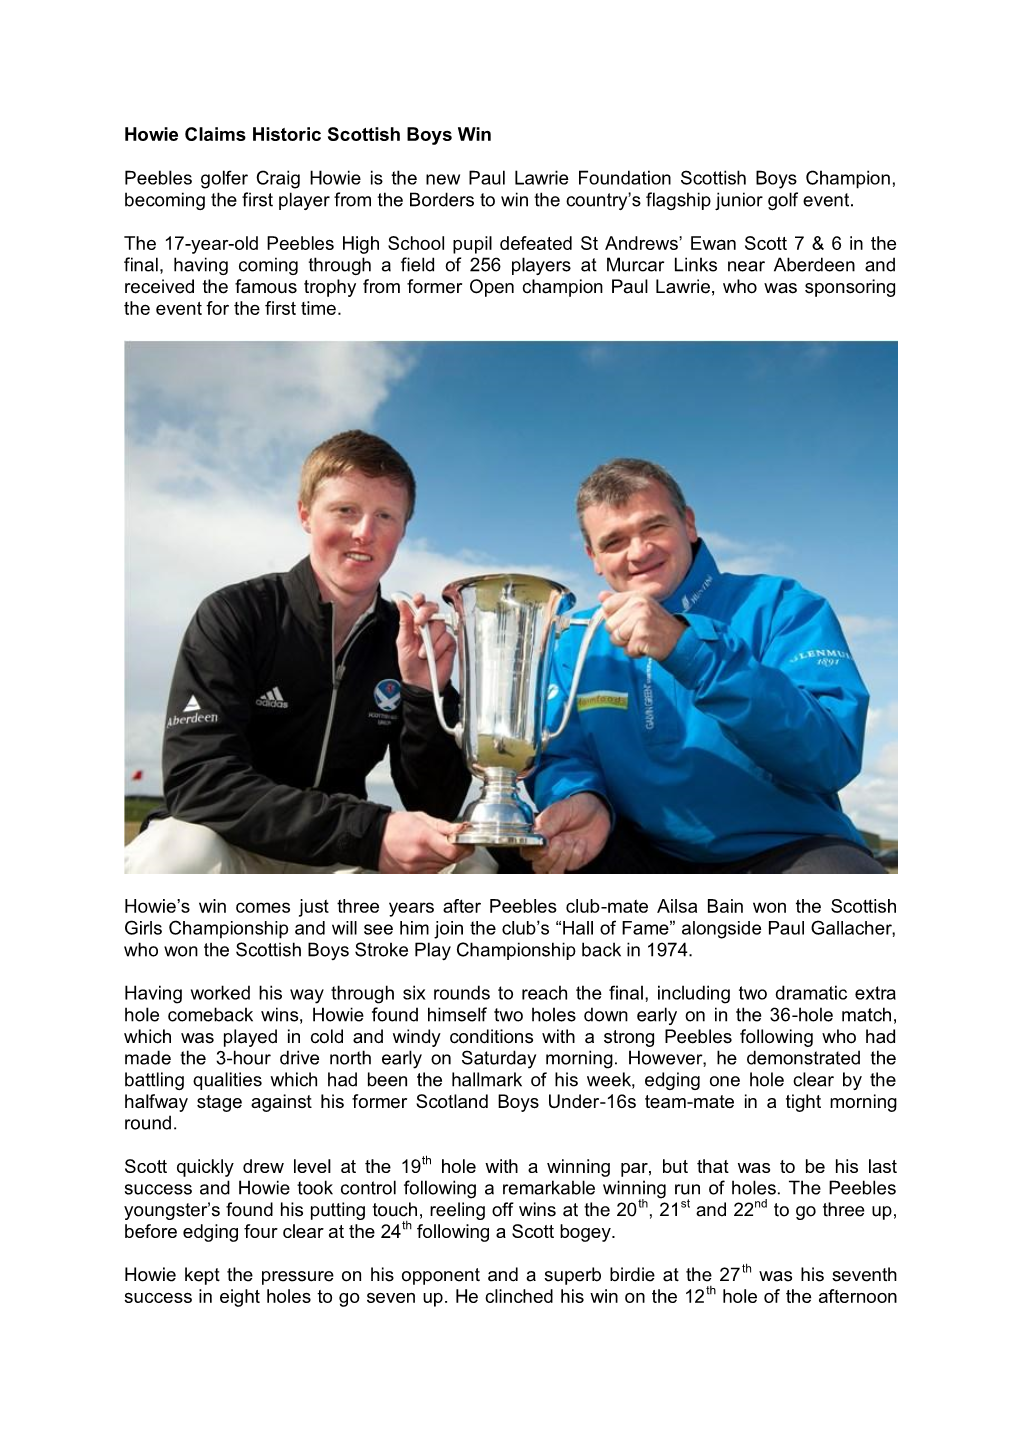 Howie Claims Historic Scottish Boys Win Peebles Golfer Craig Howie Is